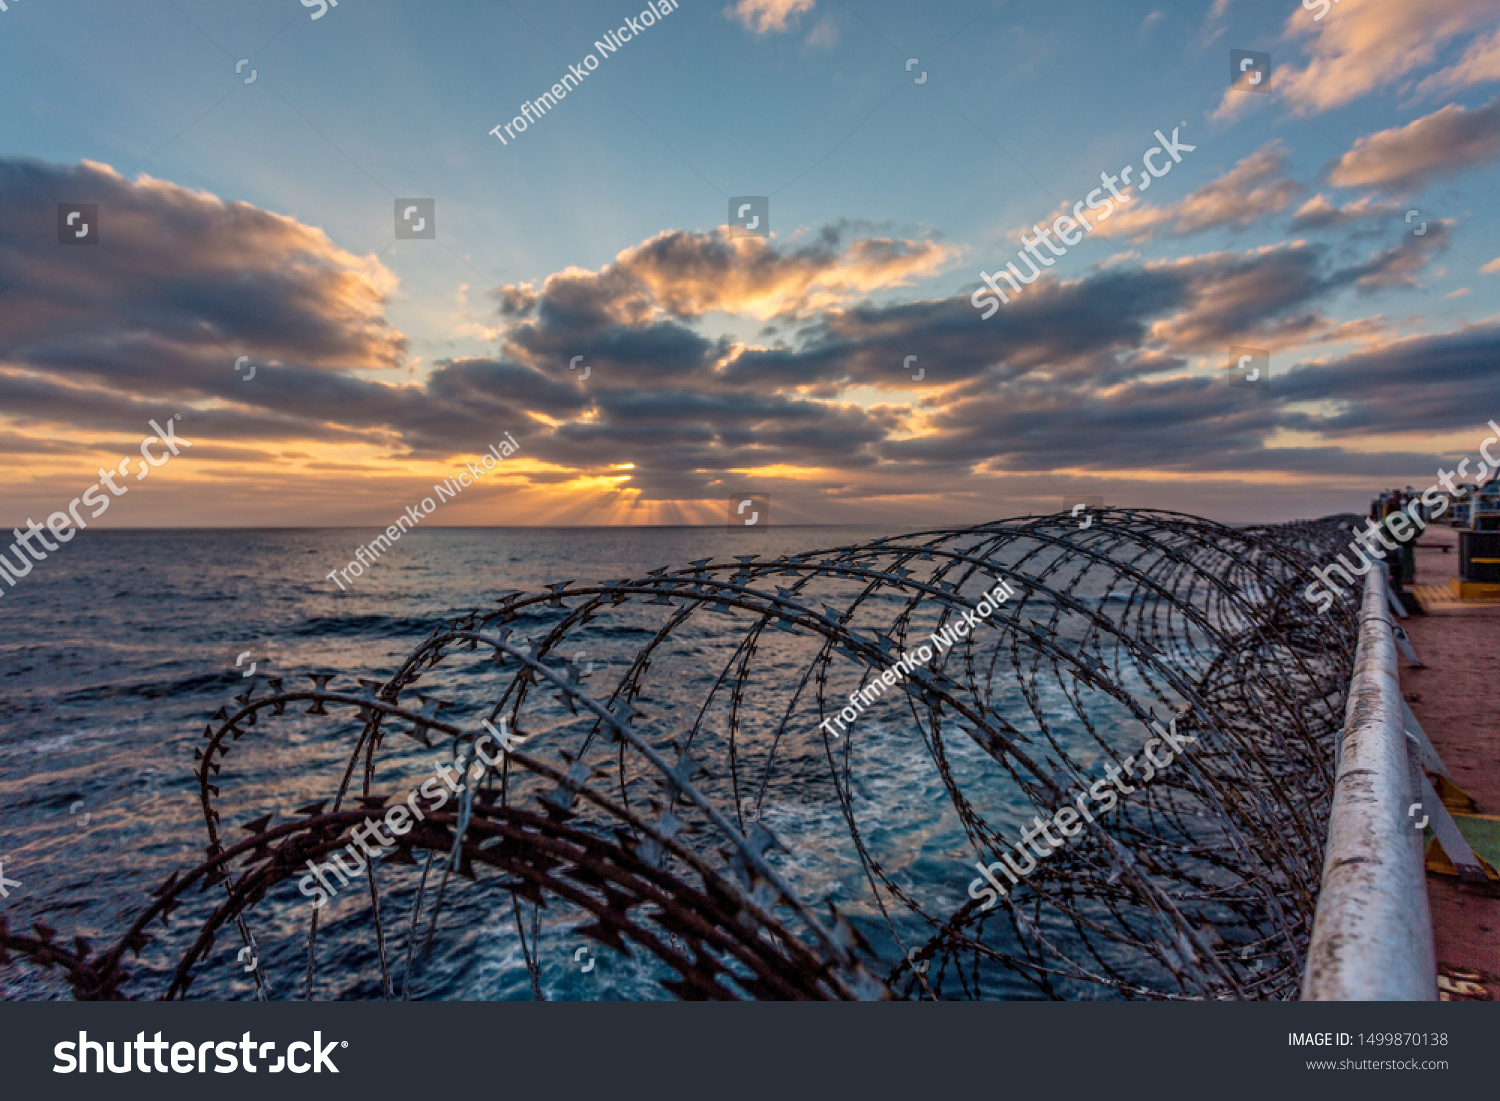 Balker in a pirate area of Africa. The photo shows a barbed wire against a sunset. Barbed wire on merchant ships is installed to protect against pirate attacks. #1499870138